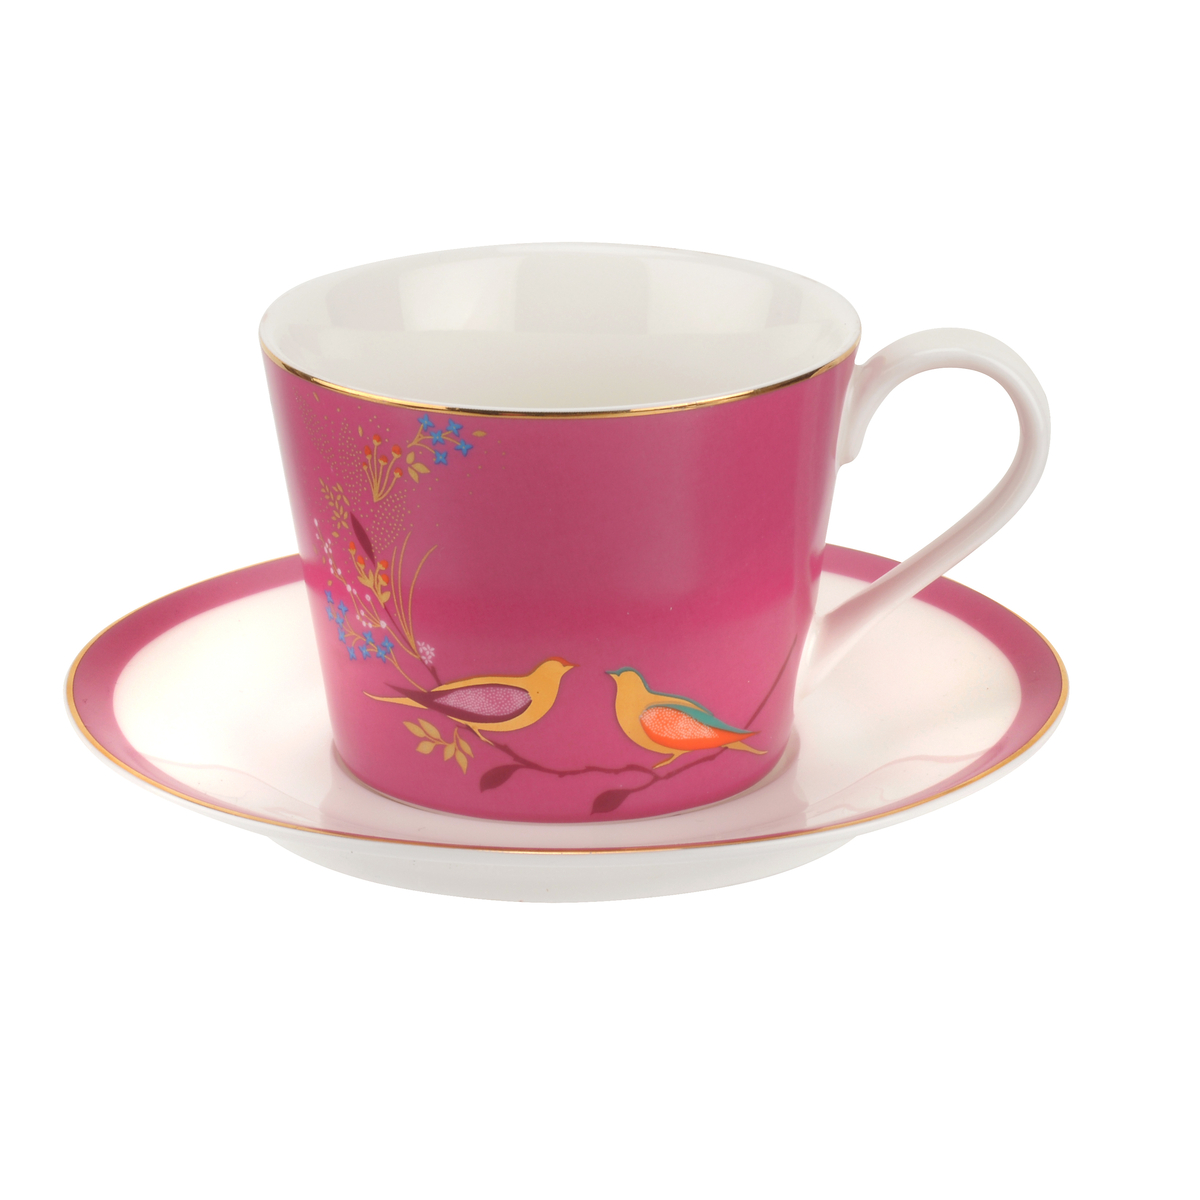 Sara Miller Chelsea Teacup and Saucer Pink image number null